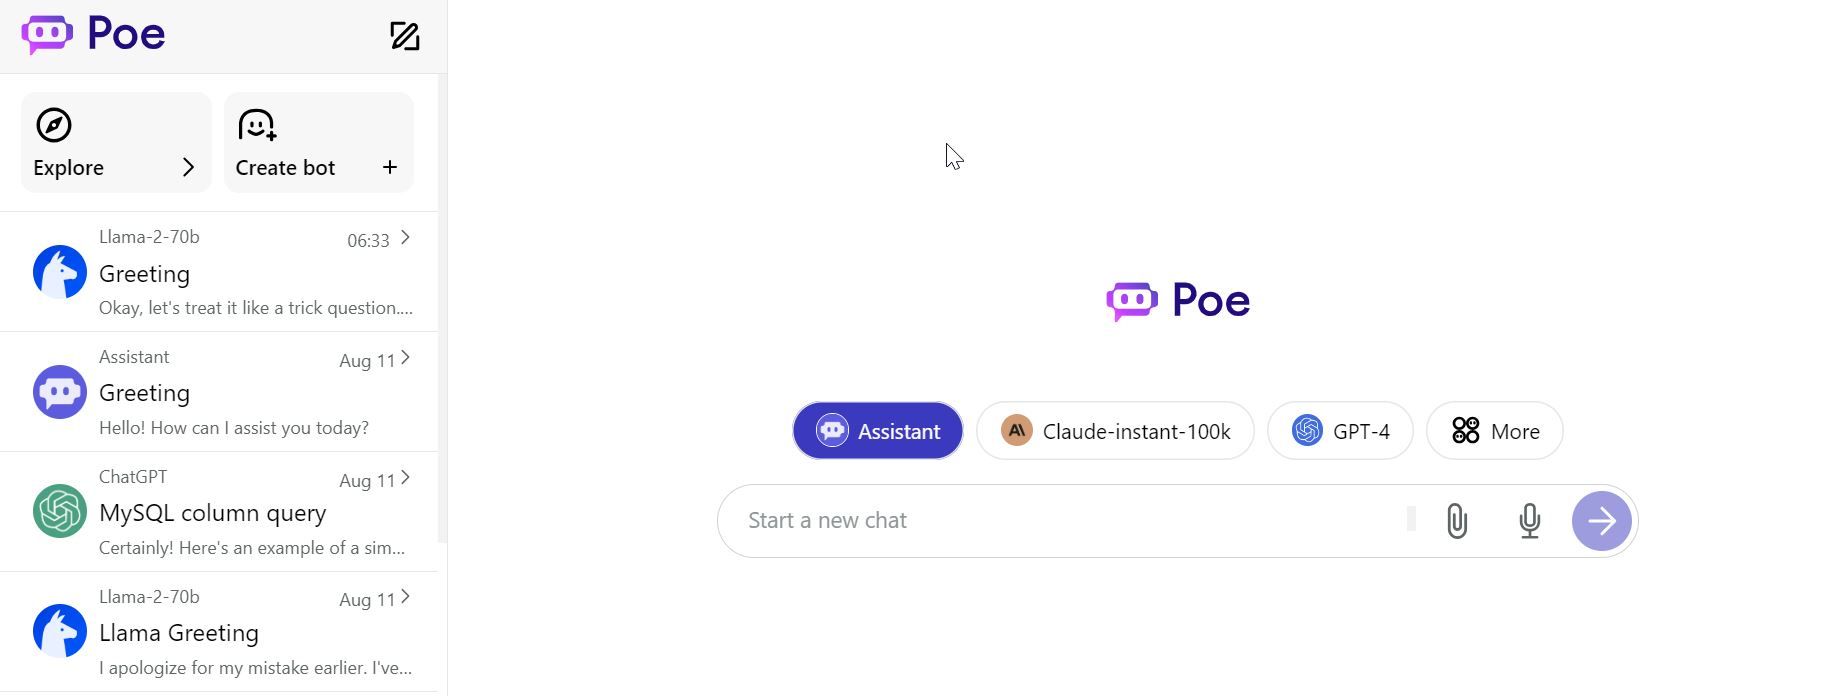 Poe.com chat interface